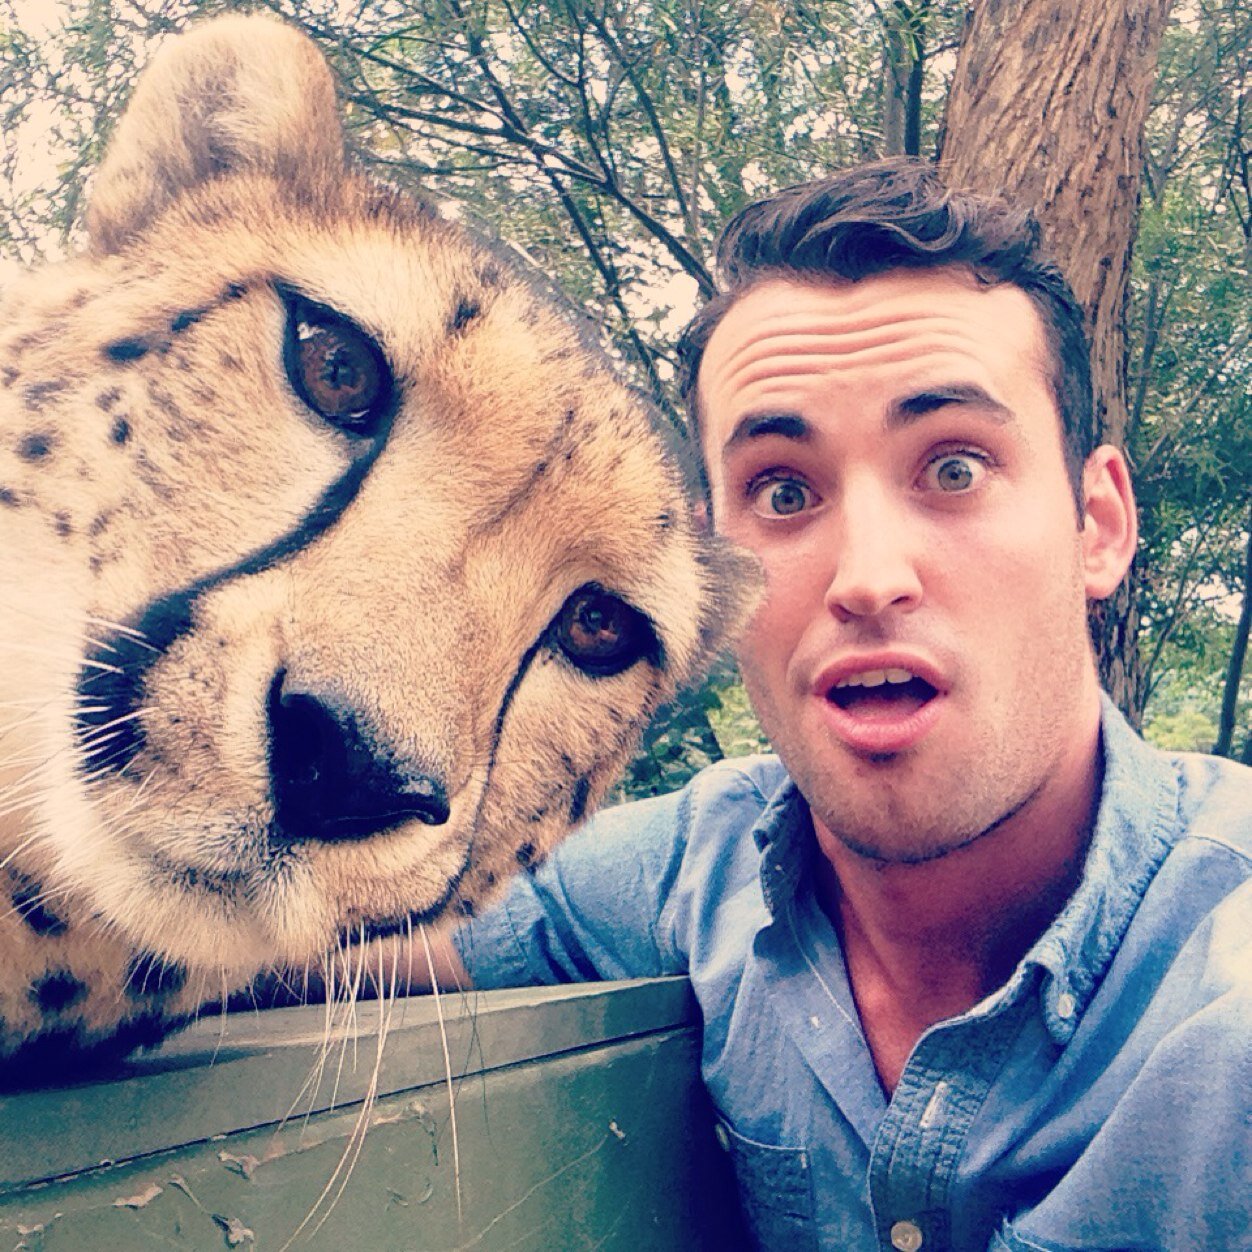 Taking selfies with pets is fine, with man-eating cheetah, not so fine.